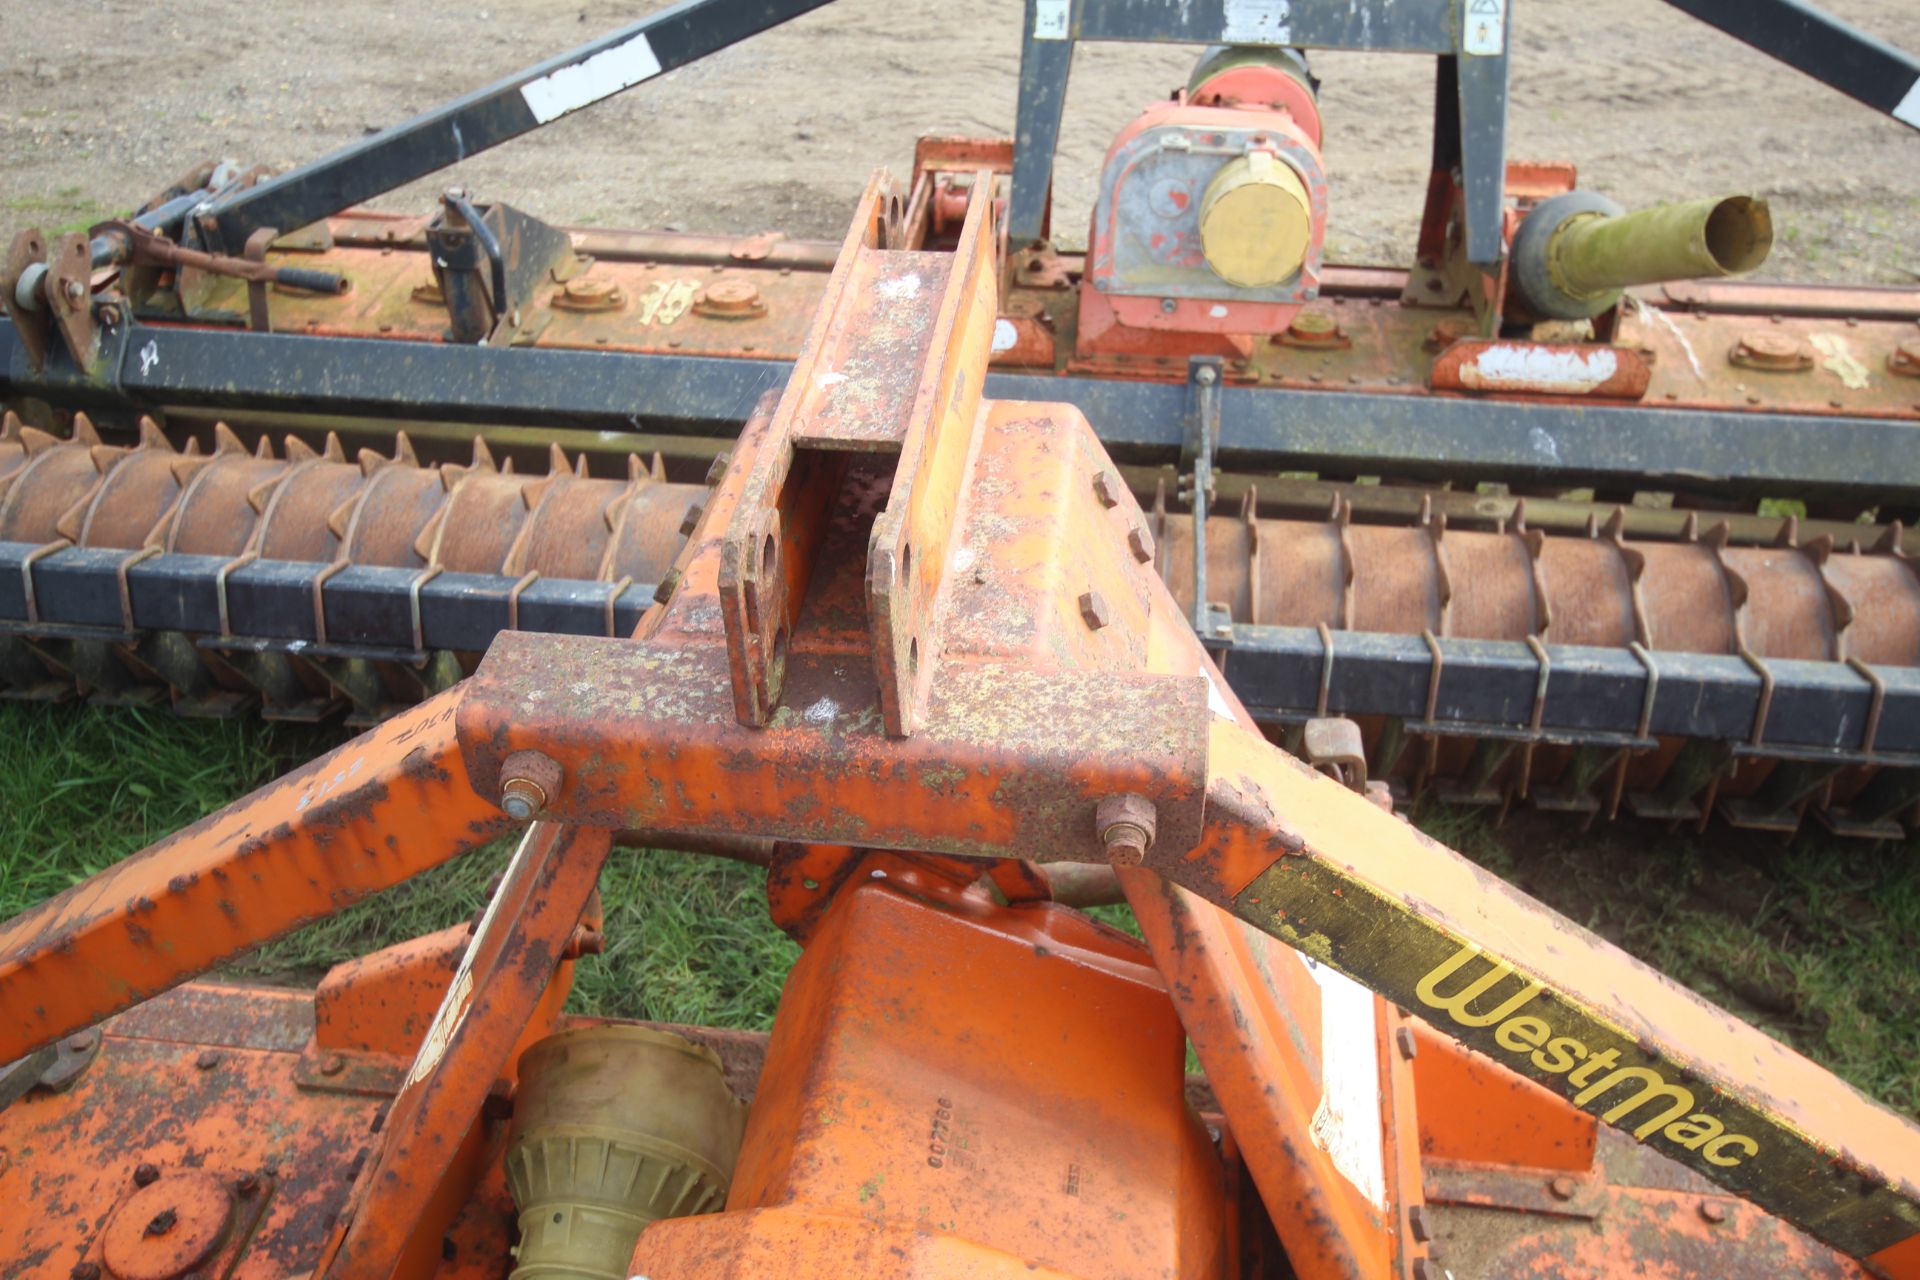 Westmac Pegararo 3m power harrow. Vendor reports owned since 2001 and used regularly. For sale due - Image 10 of 16